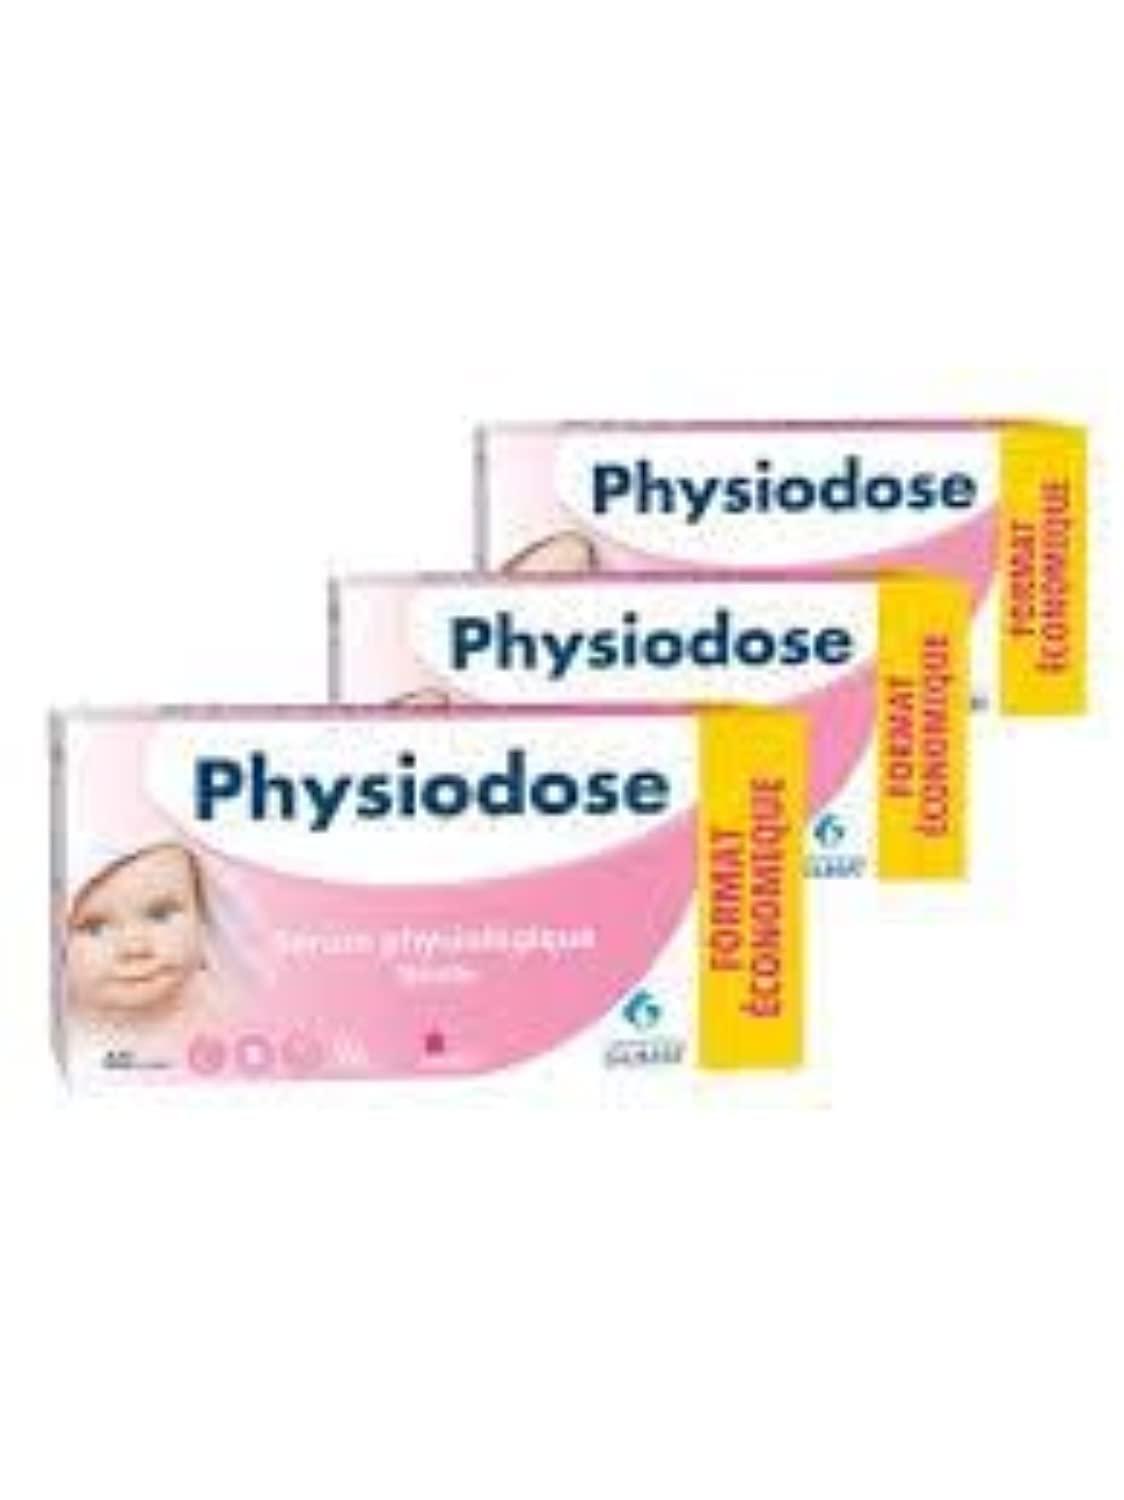  Physiodose Physiological Serum - Box of 40 Single Doses :  Health & Household